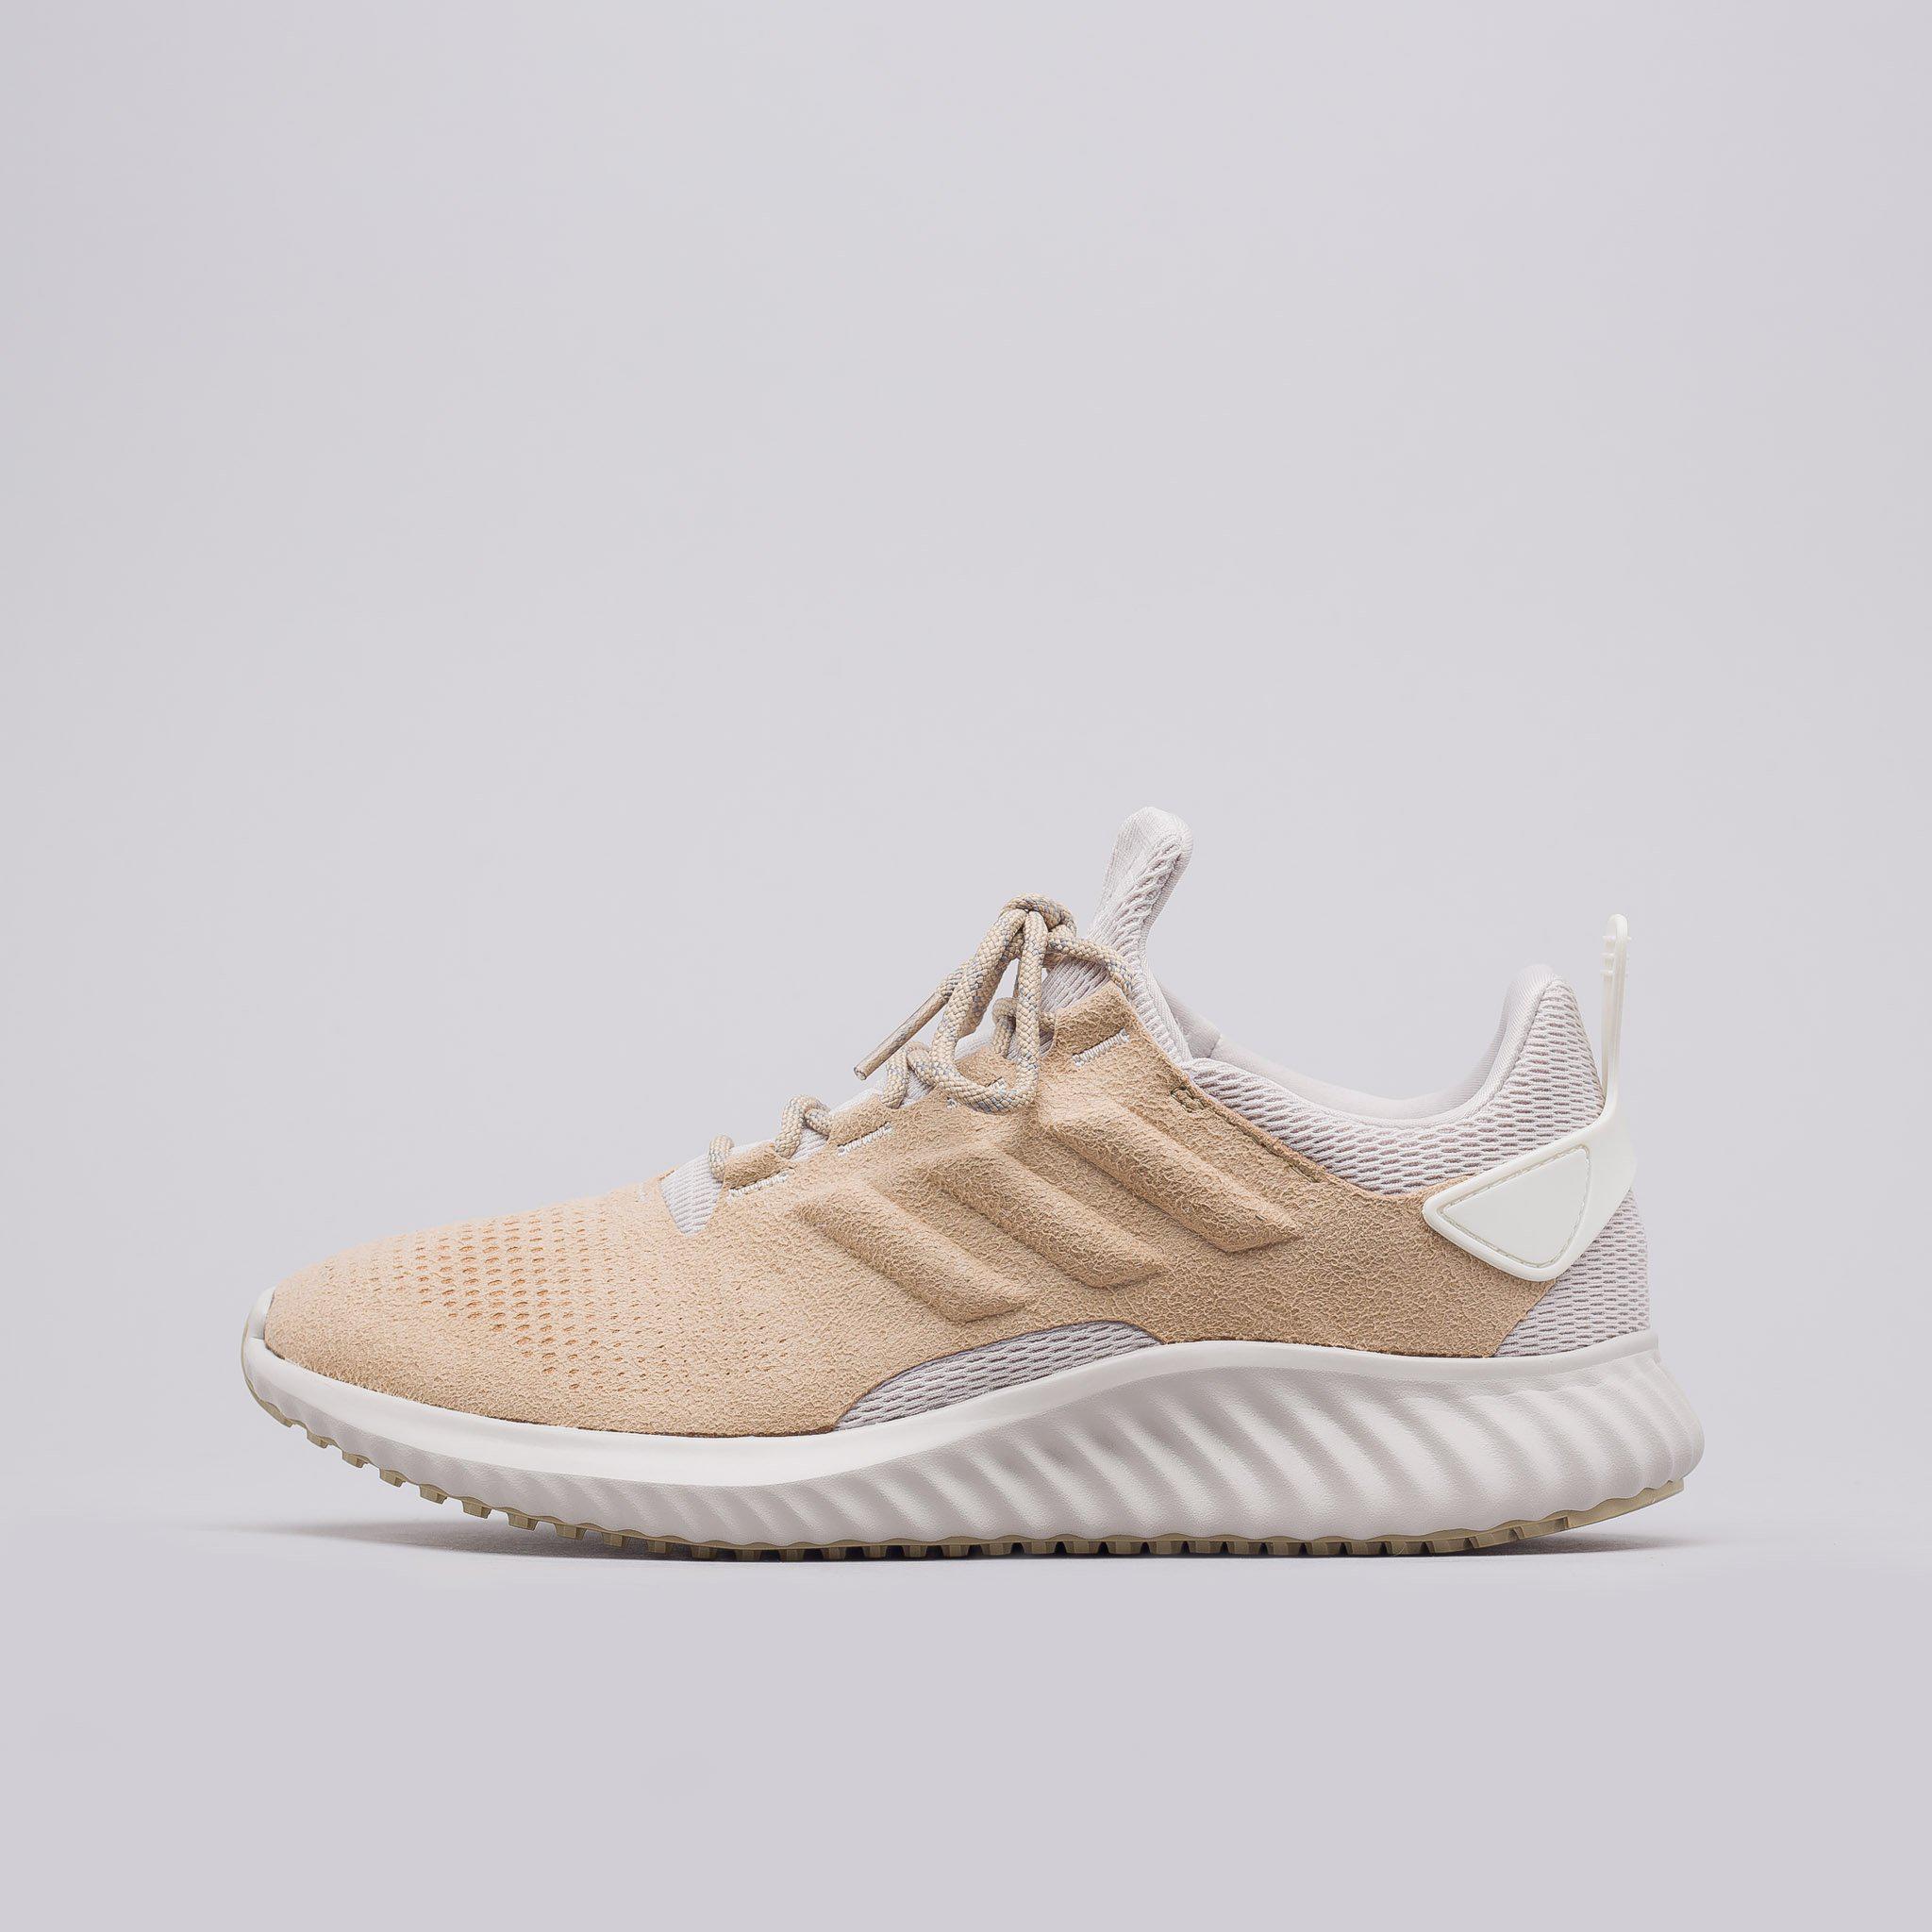 alphabounce city shoes white